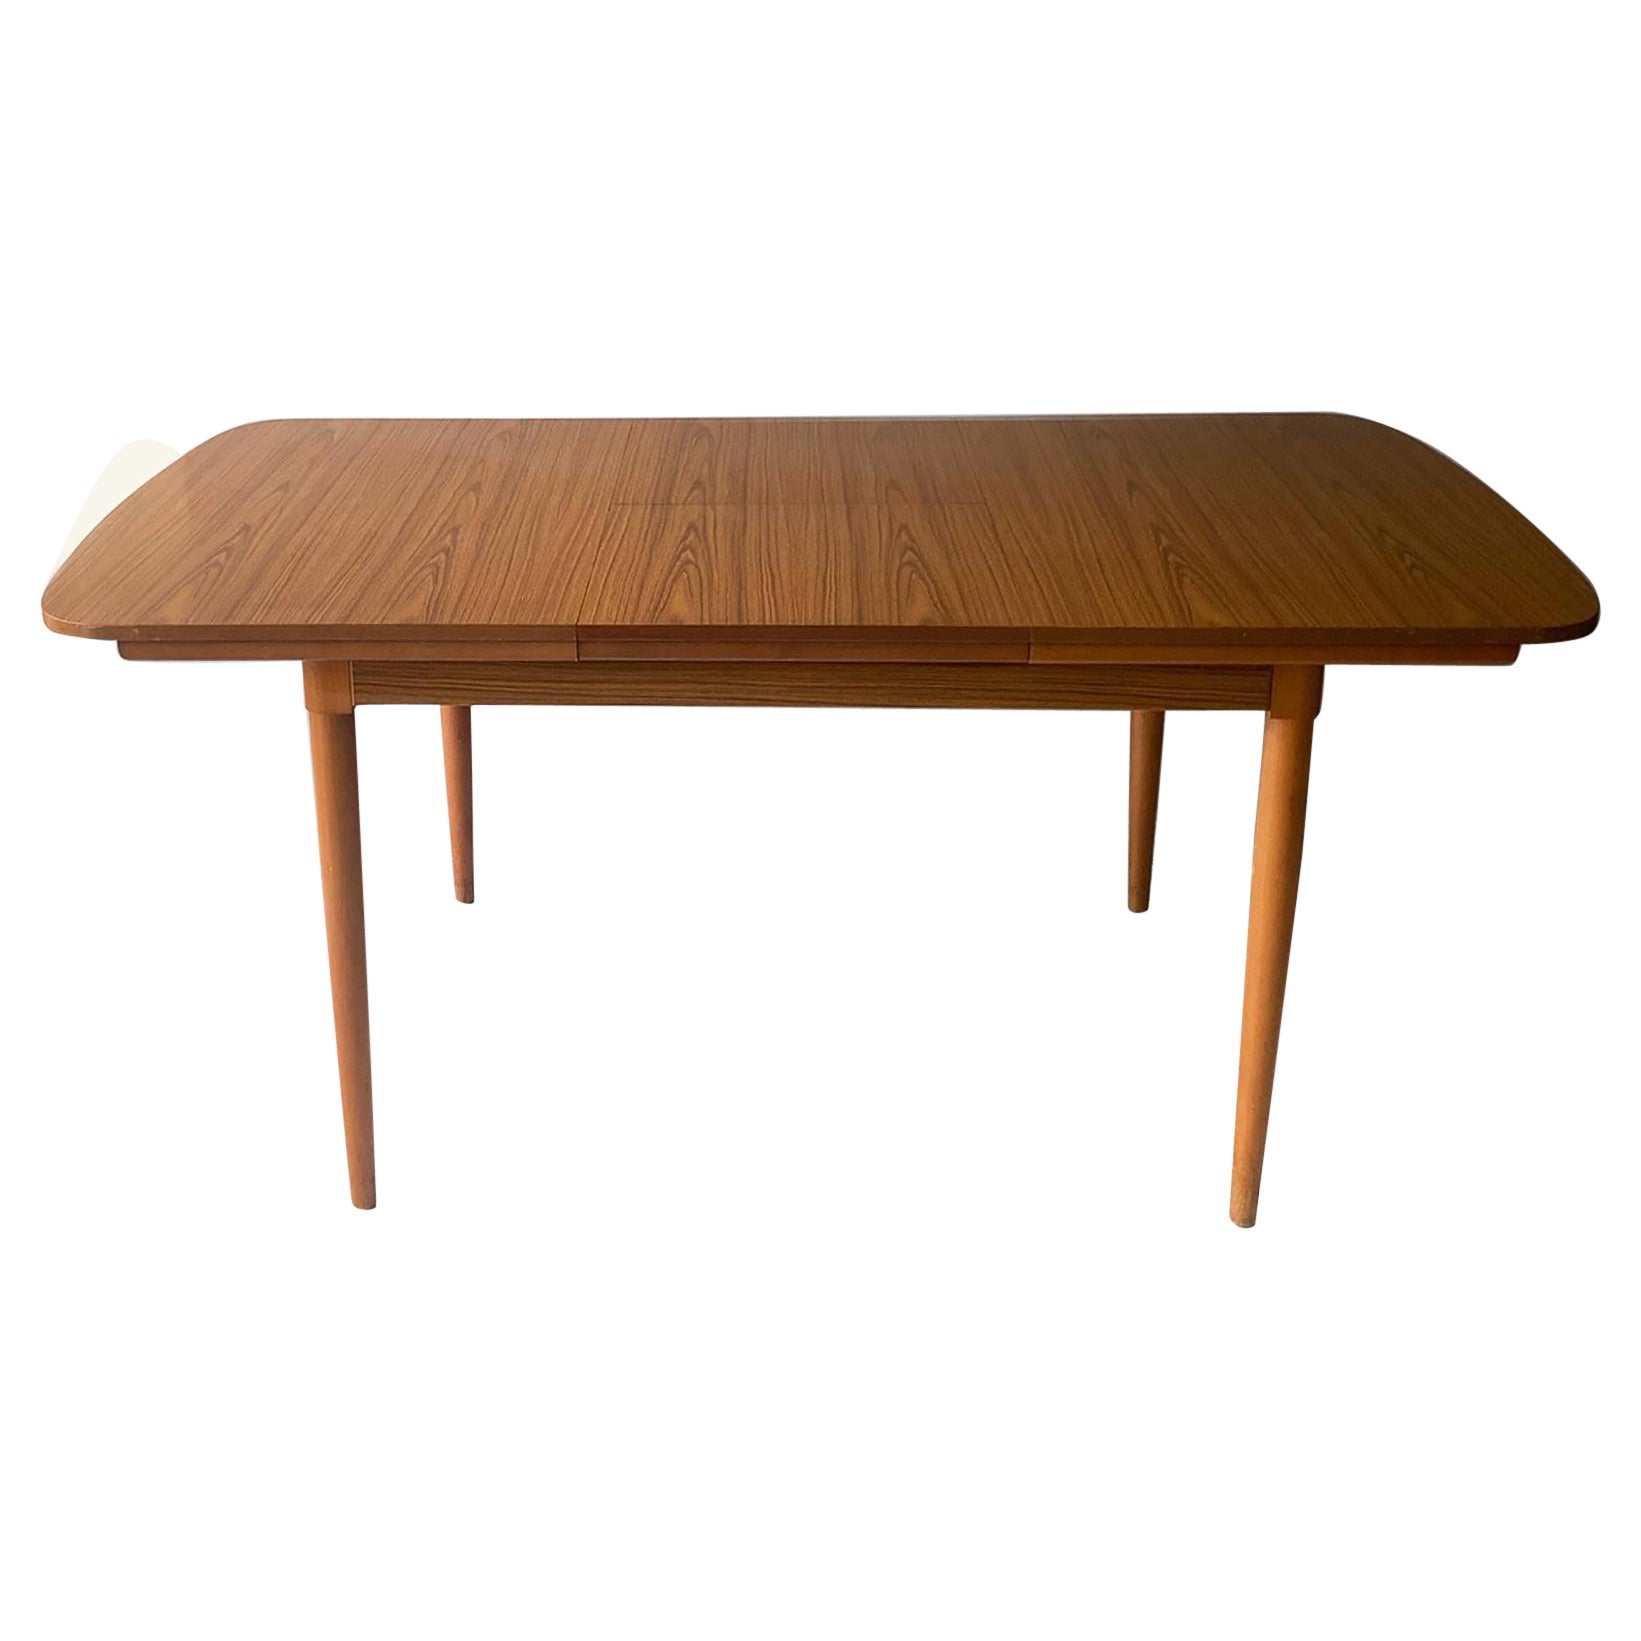 1970’s mid century extending dining table by Schreiber Furniture